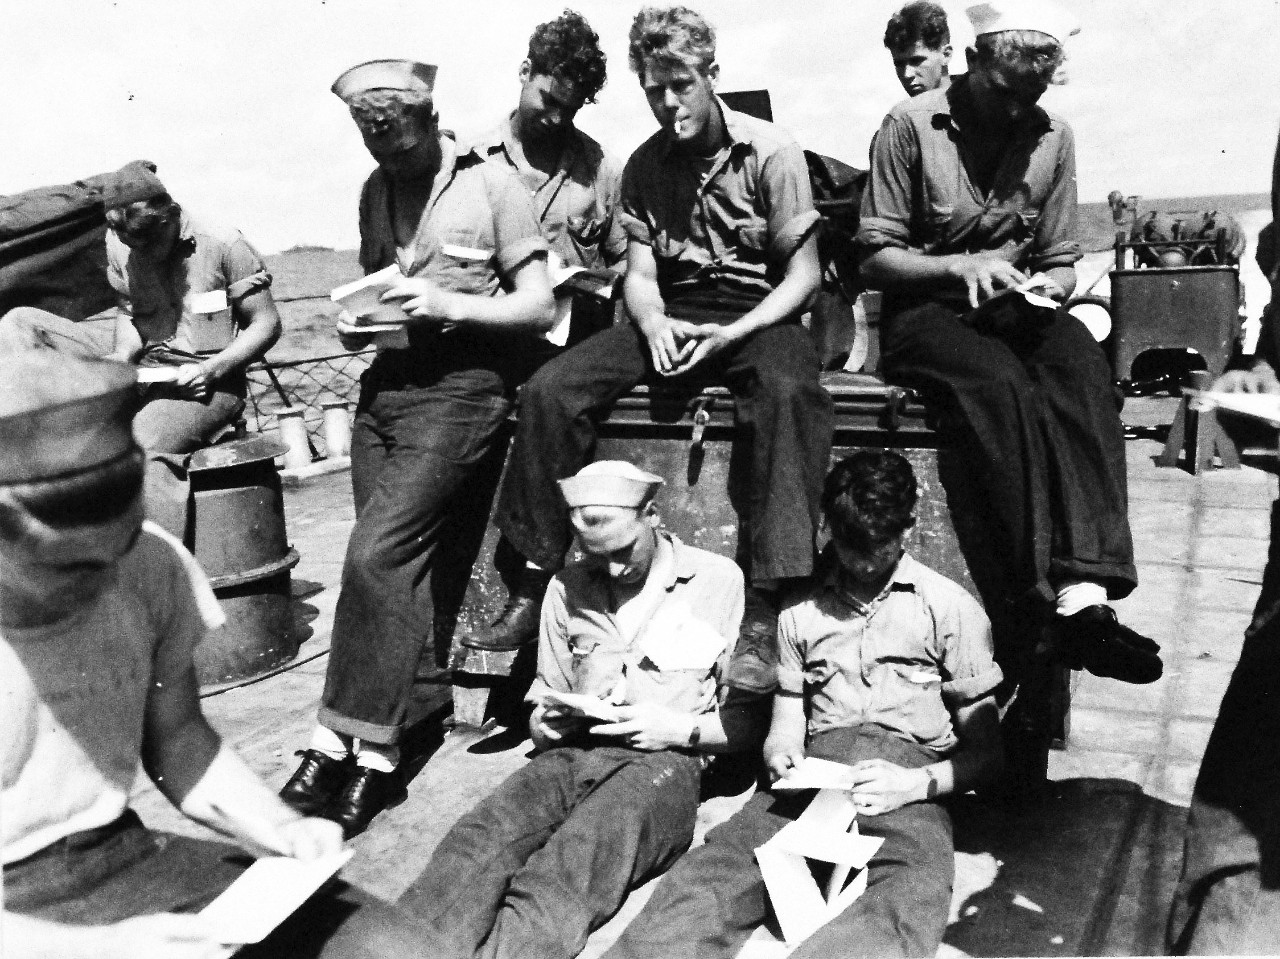 80-G-57619:  Battle of Kula Gulf, July 5-6, 1943.   Deck divisions receive mail on fantail of USS Nicholas (DD 449) after the battle.  Photographed by CPU-2, July 12-13 1943.  Official U.S. Navy Photograph, now in the collections of the National Archives.  (2016/6/2). 